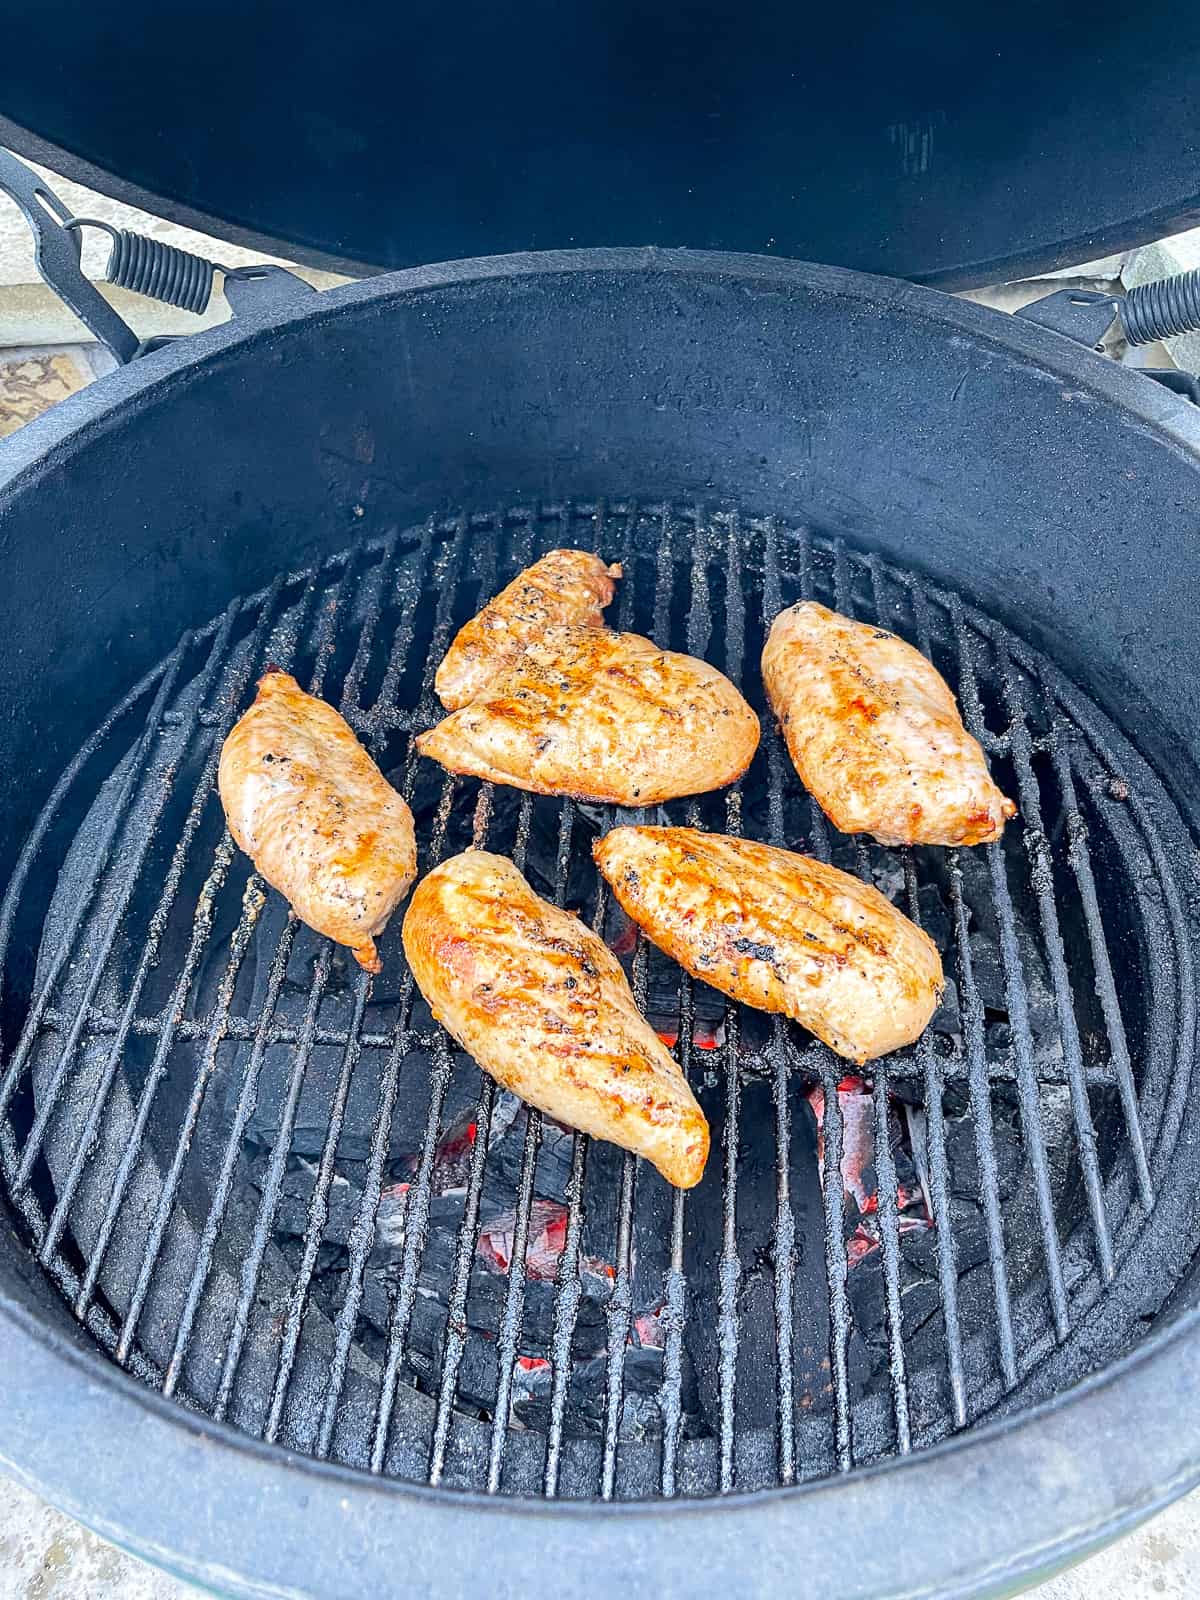 A charcoal grill with chicken on top.